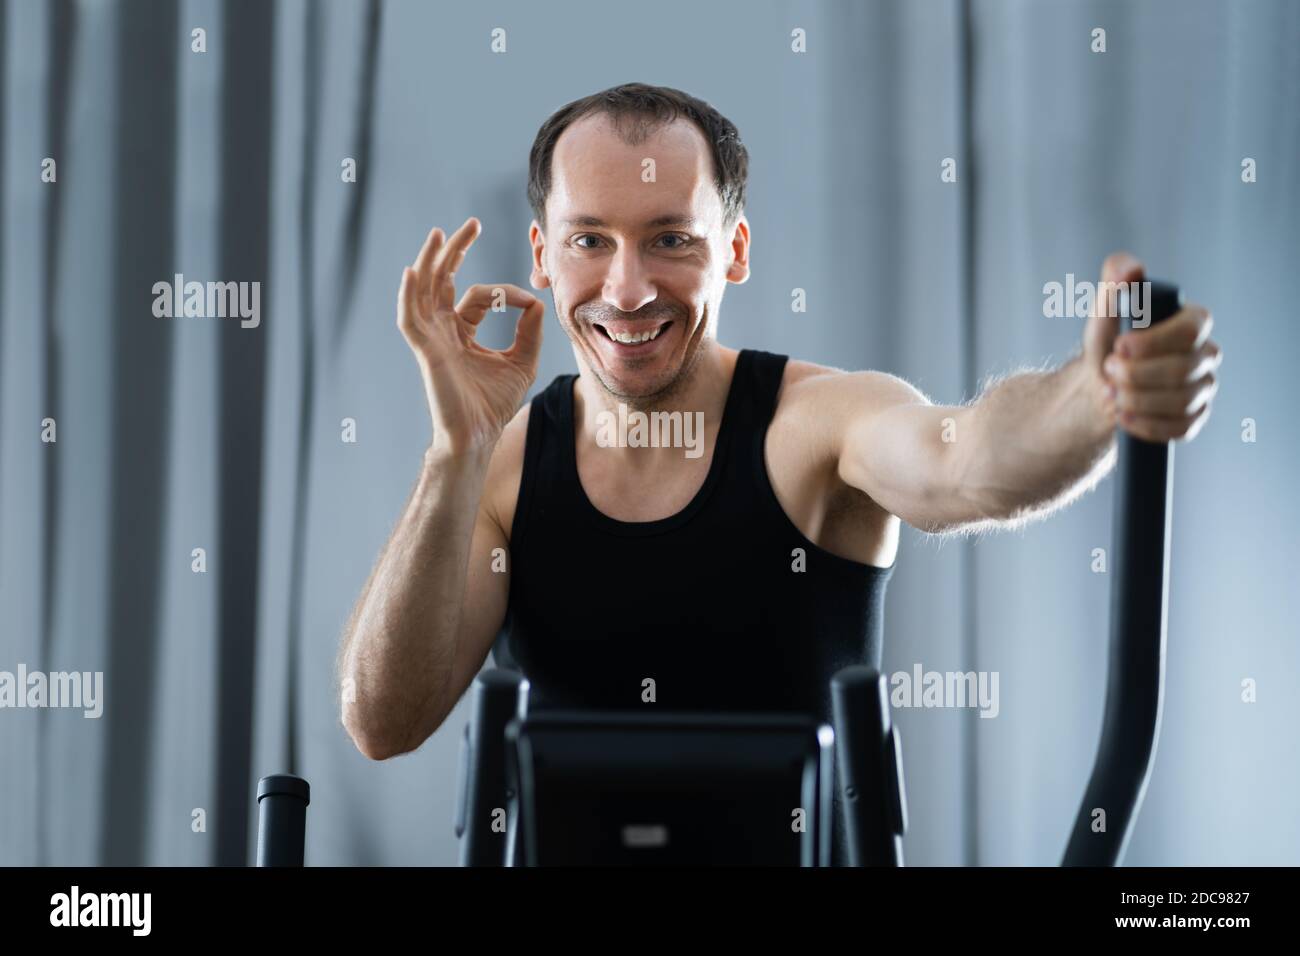 Man Training On Elliptical Trainer At Home Stock Photo